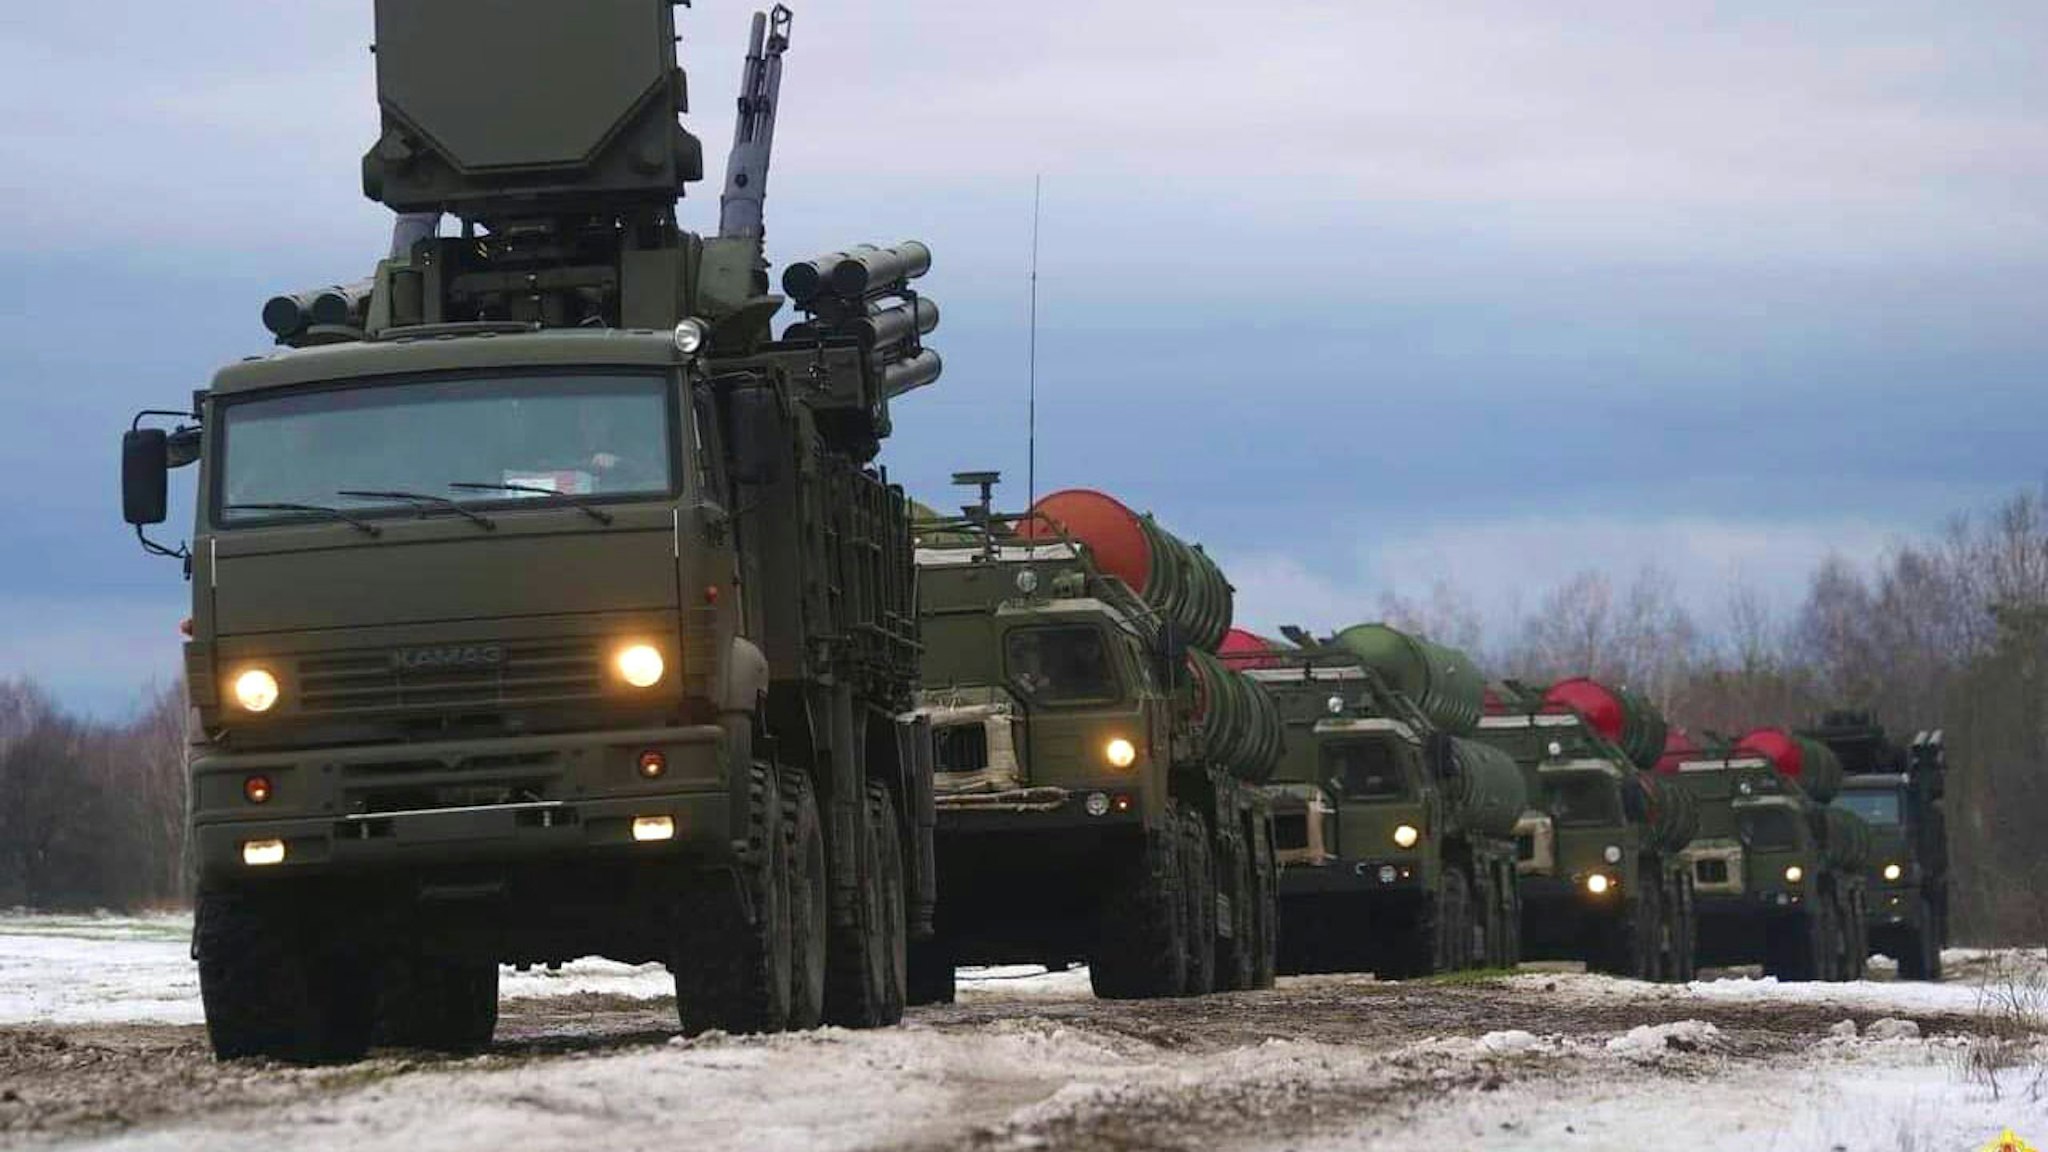 UNKNOWN LOCATION, BELARUS - FEBRUARY 09: (----EDITORIAL USE ONLY â MANDATORY CREDIT - "BELARUS DEFENSE MINISTRY / HANDOUT" - NO MARKETING NO ADVERTISING CAMPAIGNS - DISTRIBUTED AS A SERVICE TO CLIENTS----) S-400 and Pantsir-S air defence systems arrive to participate in the Russian-Belarusian military will start a joint exercise amid tension between Ukraine and Russia at an Unknown location in Belarus on February 9, 2022. According to the Belarusian Ministry of Defense, the joint military exercise "Allied Resolve 2022" will take place from February 10-20. The military units of the Russian Armed Forces from the Eastern Military District and some military units of the Belarusian Armed Forces will in the exercise.